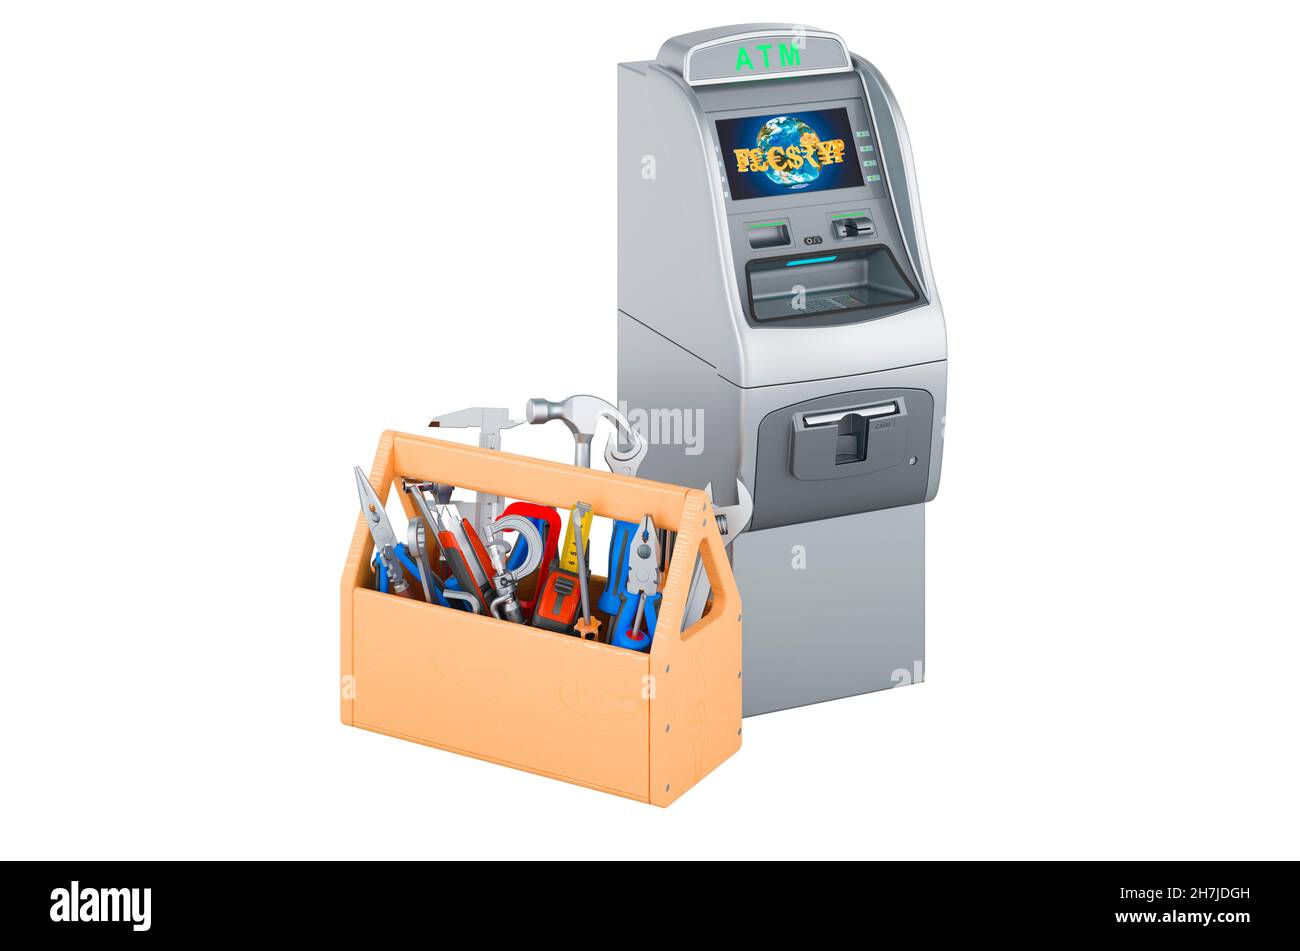 Cash machine with toolbox. Service and repair of ATM machines, 3D rendering isolated on white background Stock Photo